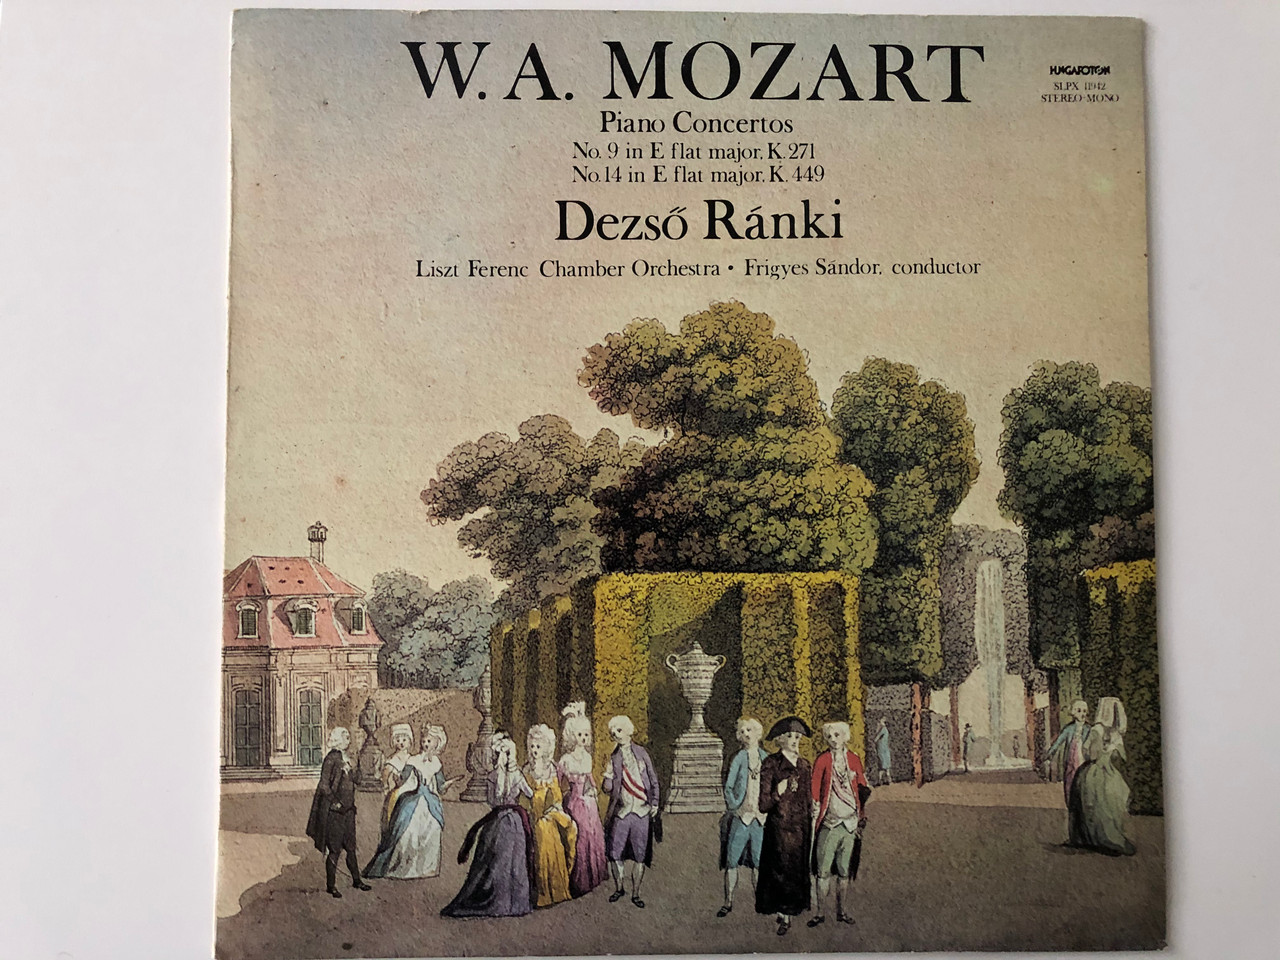 https://cdn10.bigcommerce.com/s-62bdpkt7pb/products/29963/images/178103/W._A._Mozart_-_Piano_Concertos_No._9_In_E_Flat_Major_K._271_No._14_In_E_Flat_Major_K._449_Dezs_Rnki_Liszt_Ferenc_Chamber_Orchestra_Frigyes_Sndor_-_conductor_Hungaroton_LP_1978_Stereo_1__73978.1620838642.1280.1280.JPG?c=2&_ga=2.265573901.305117247.1620828817-17914180.1620828817